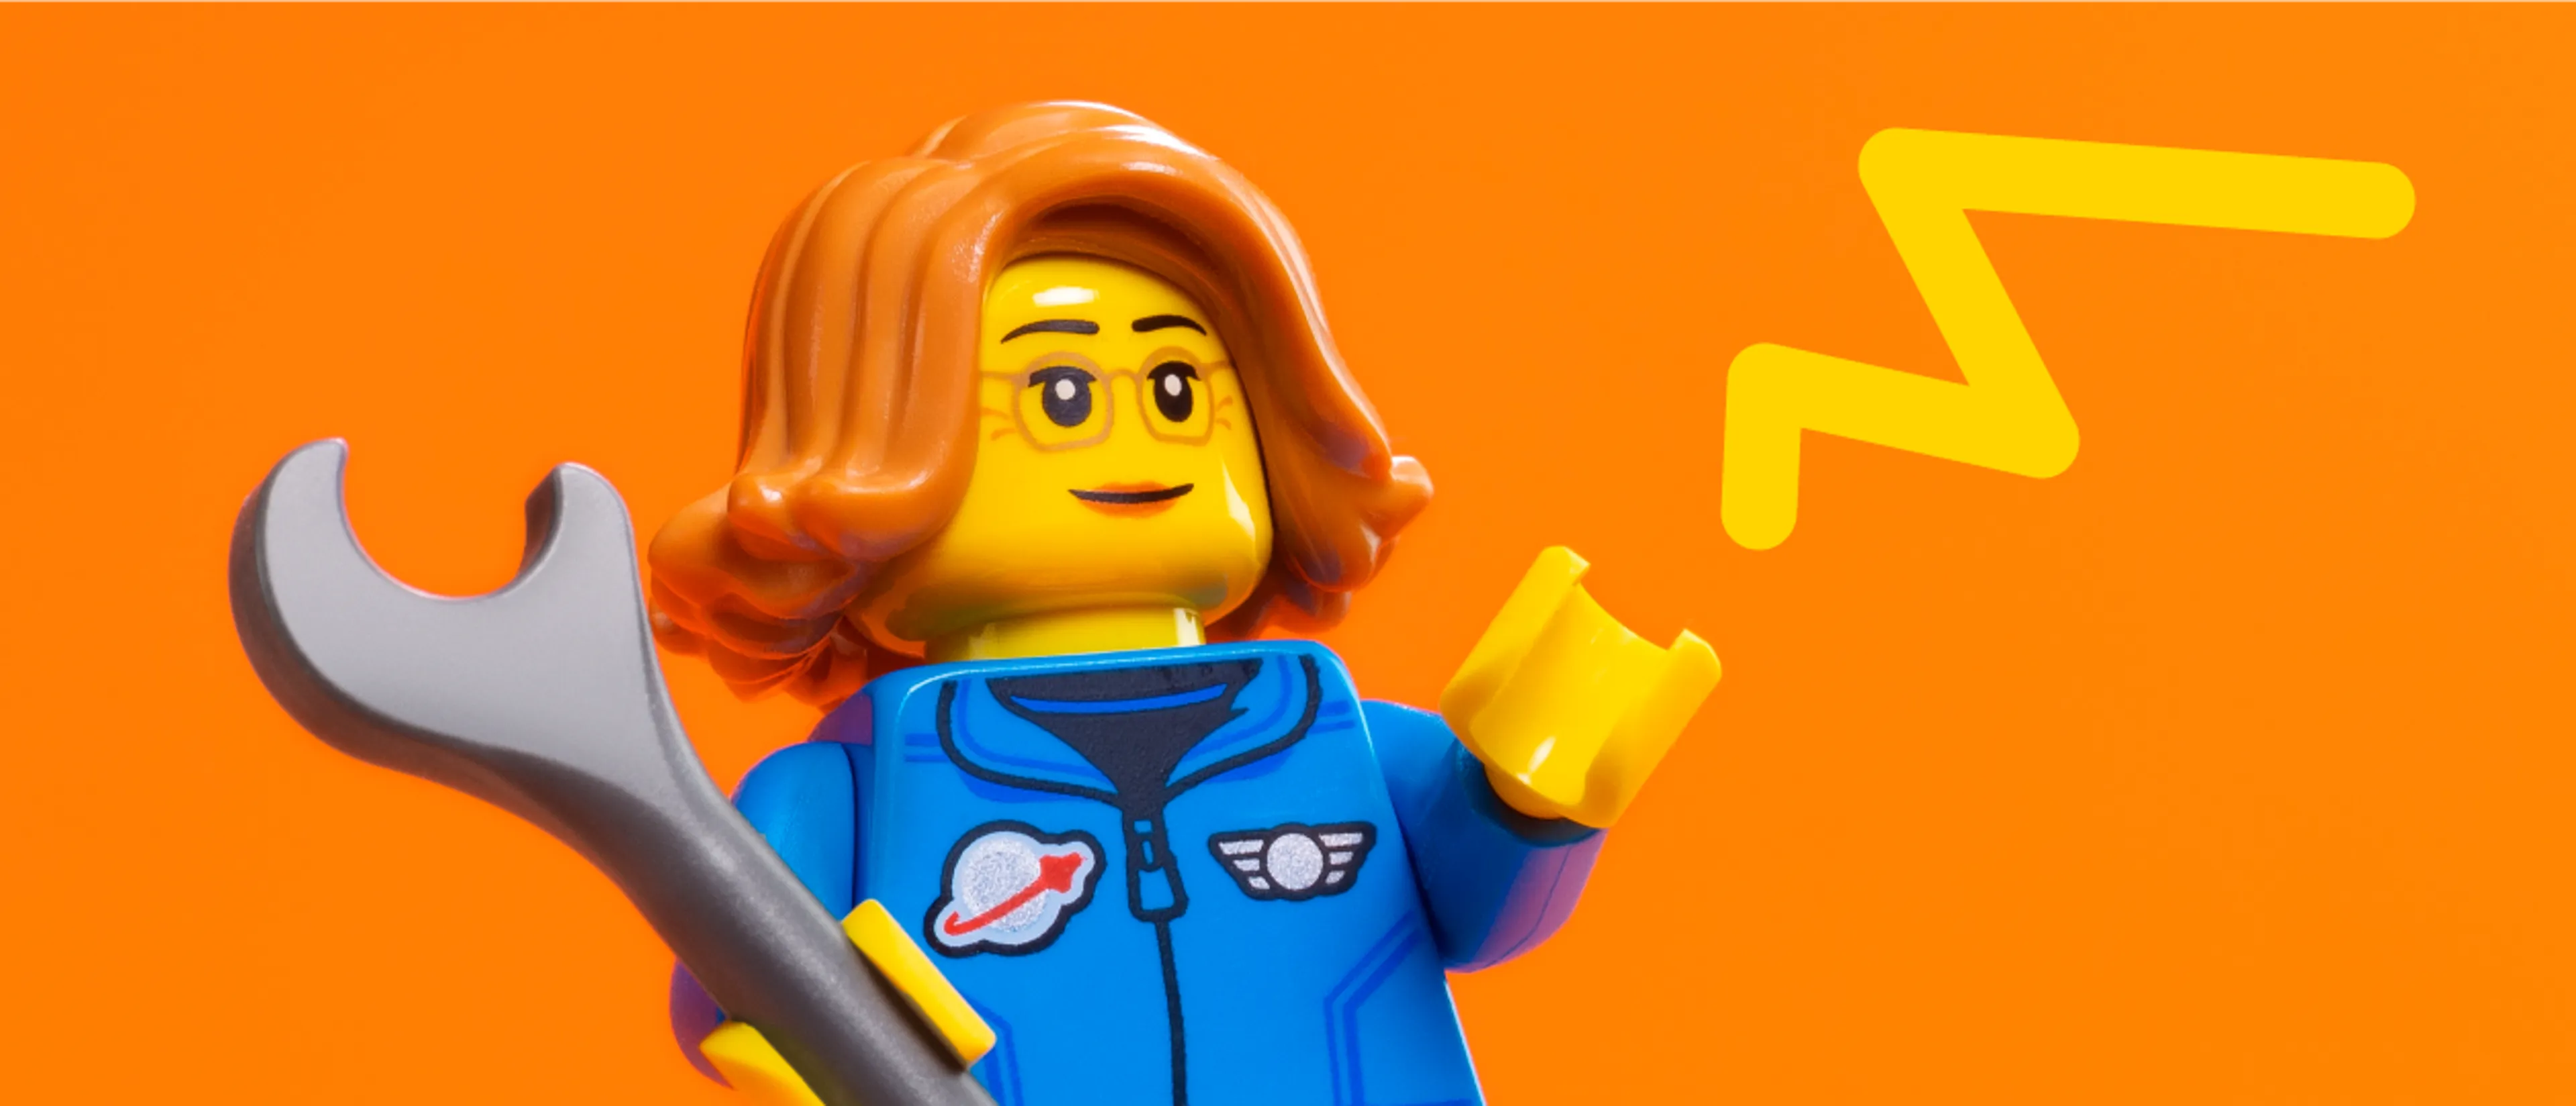 A minifigure holds a spanner